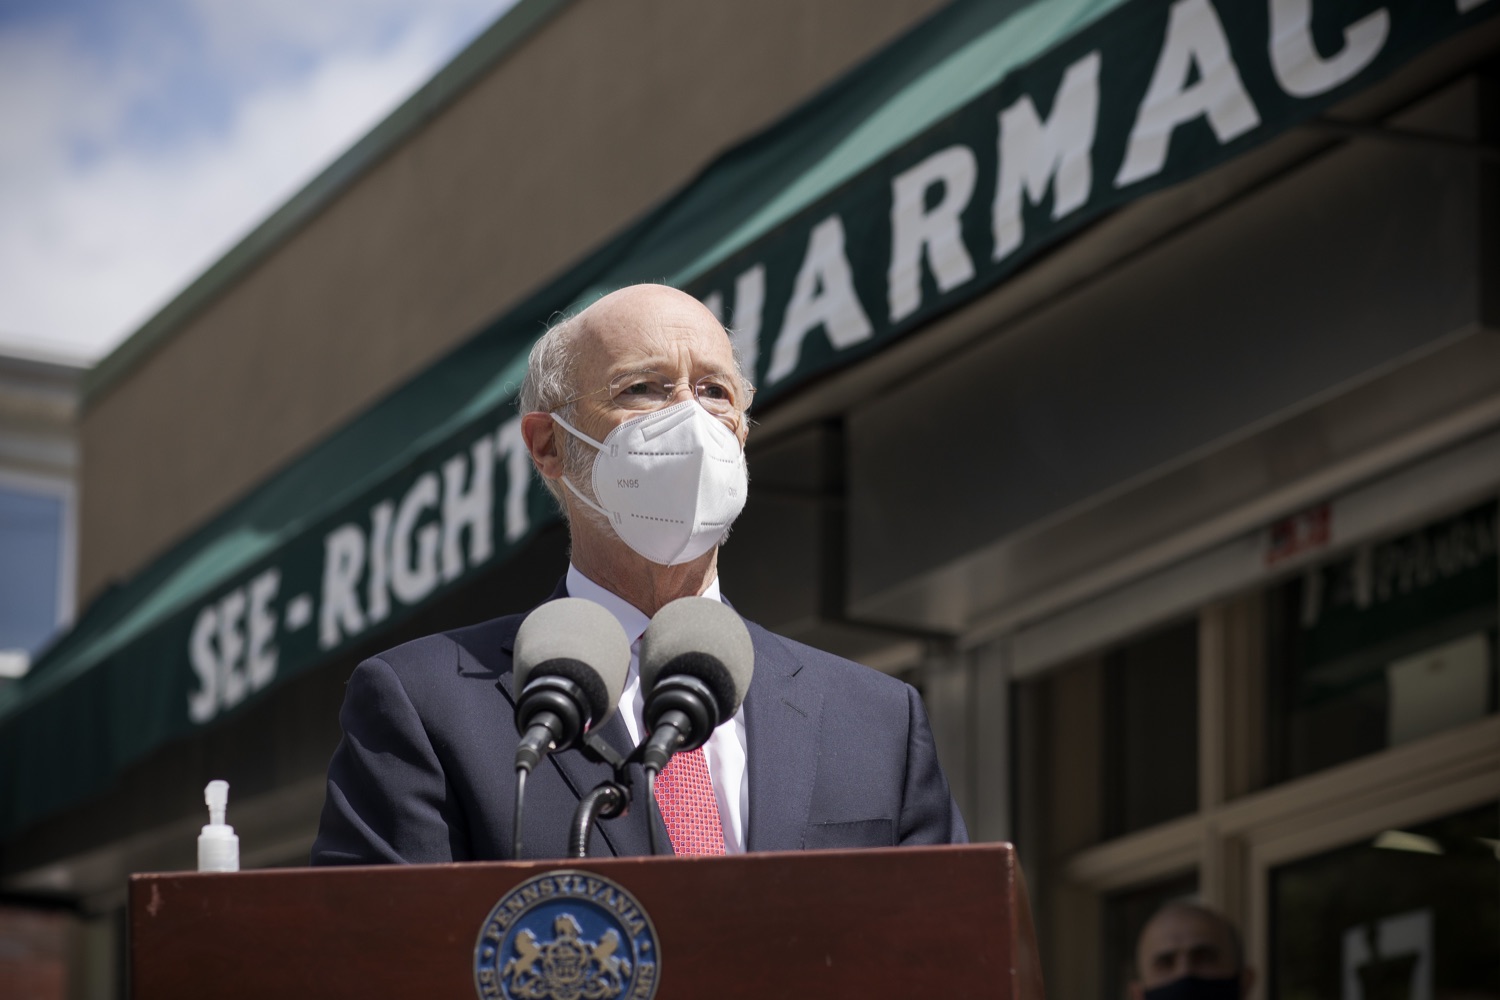 Pennsylvania Governor Tom Wolf speaking with the press.  Governor Tom Wolf today visited See-Right Pharmacy in Harrisburg to learn more about how the local, neighborhood pharmacy is vaccinating community members and to talk about COVID-19 vaccine hesitancy in Pennsylvania. Harrisburg, PA  April 22, 2021<br><a href="https://filesource.amperwave.net/commonwealthofpa/photo/18704_gov_seeRight_dz_016.jpg" target="_blank">⇣ Download Photo</a>